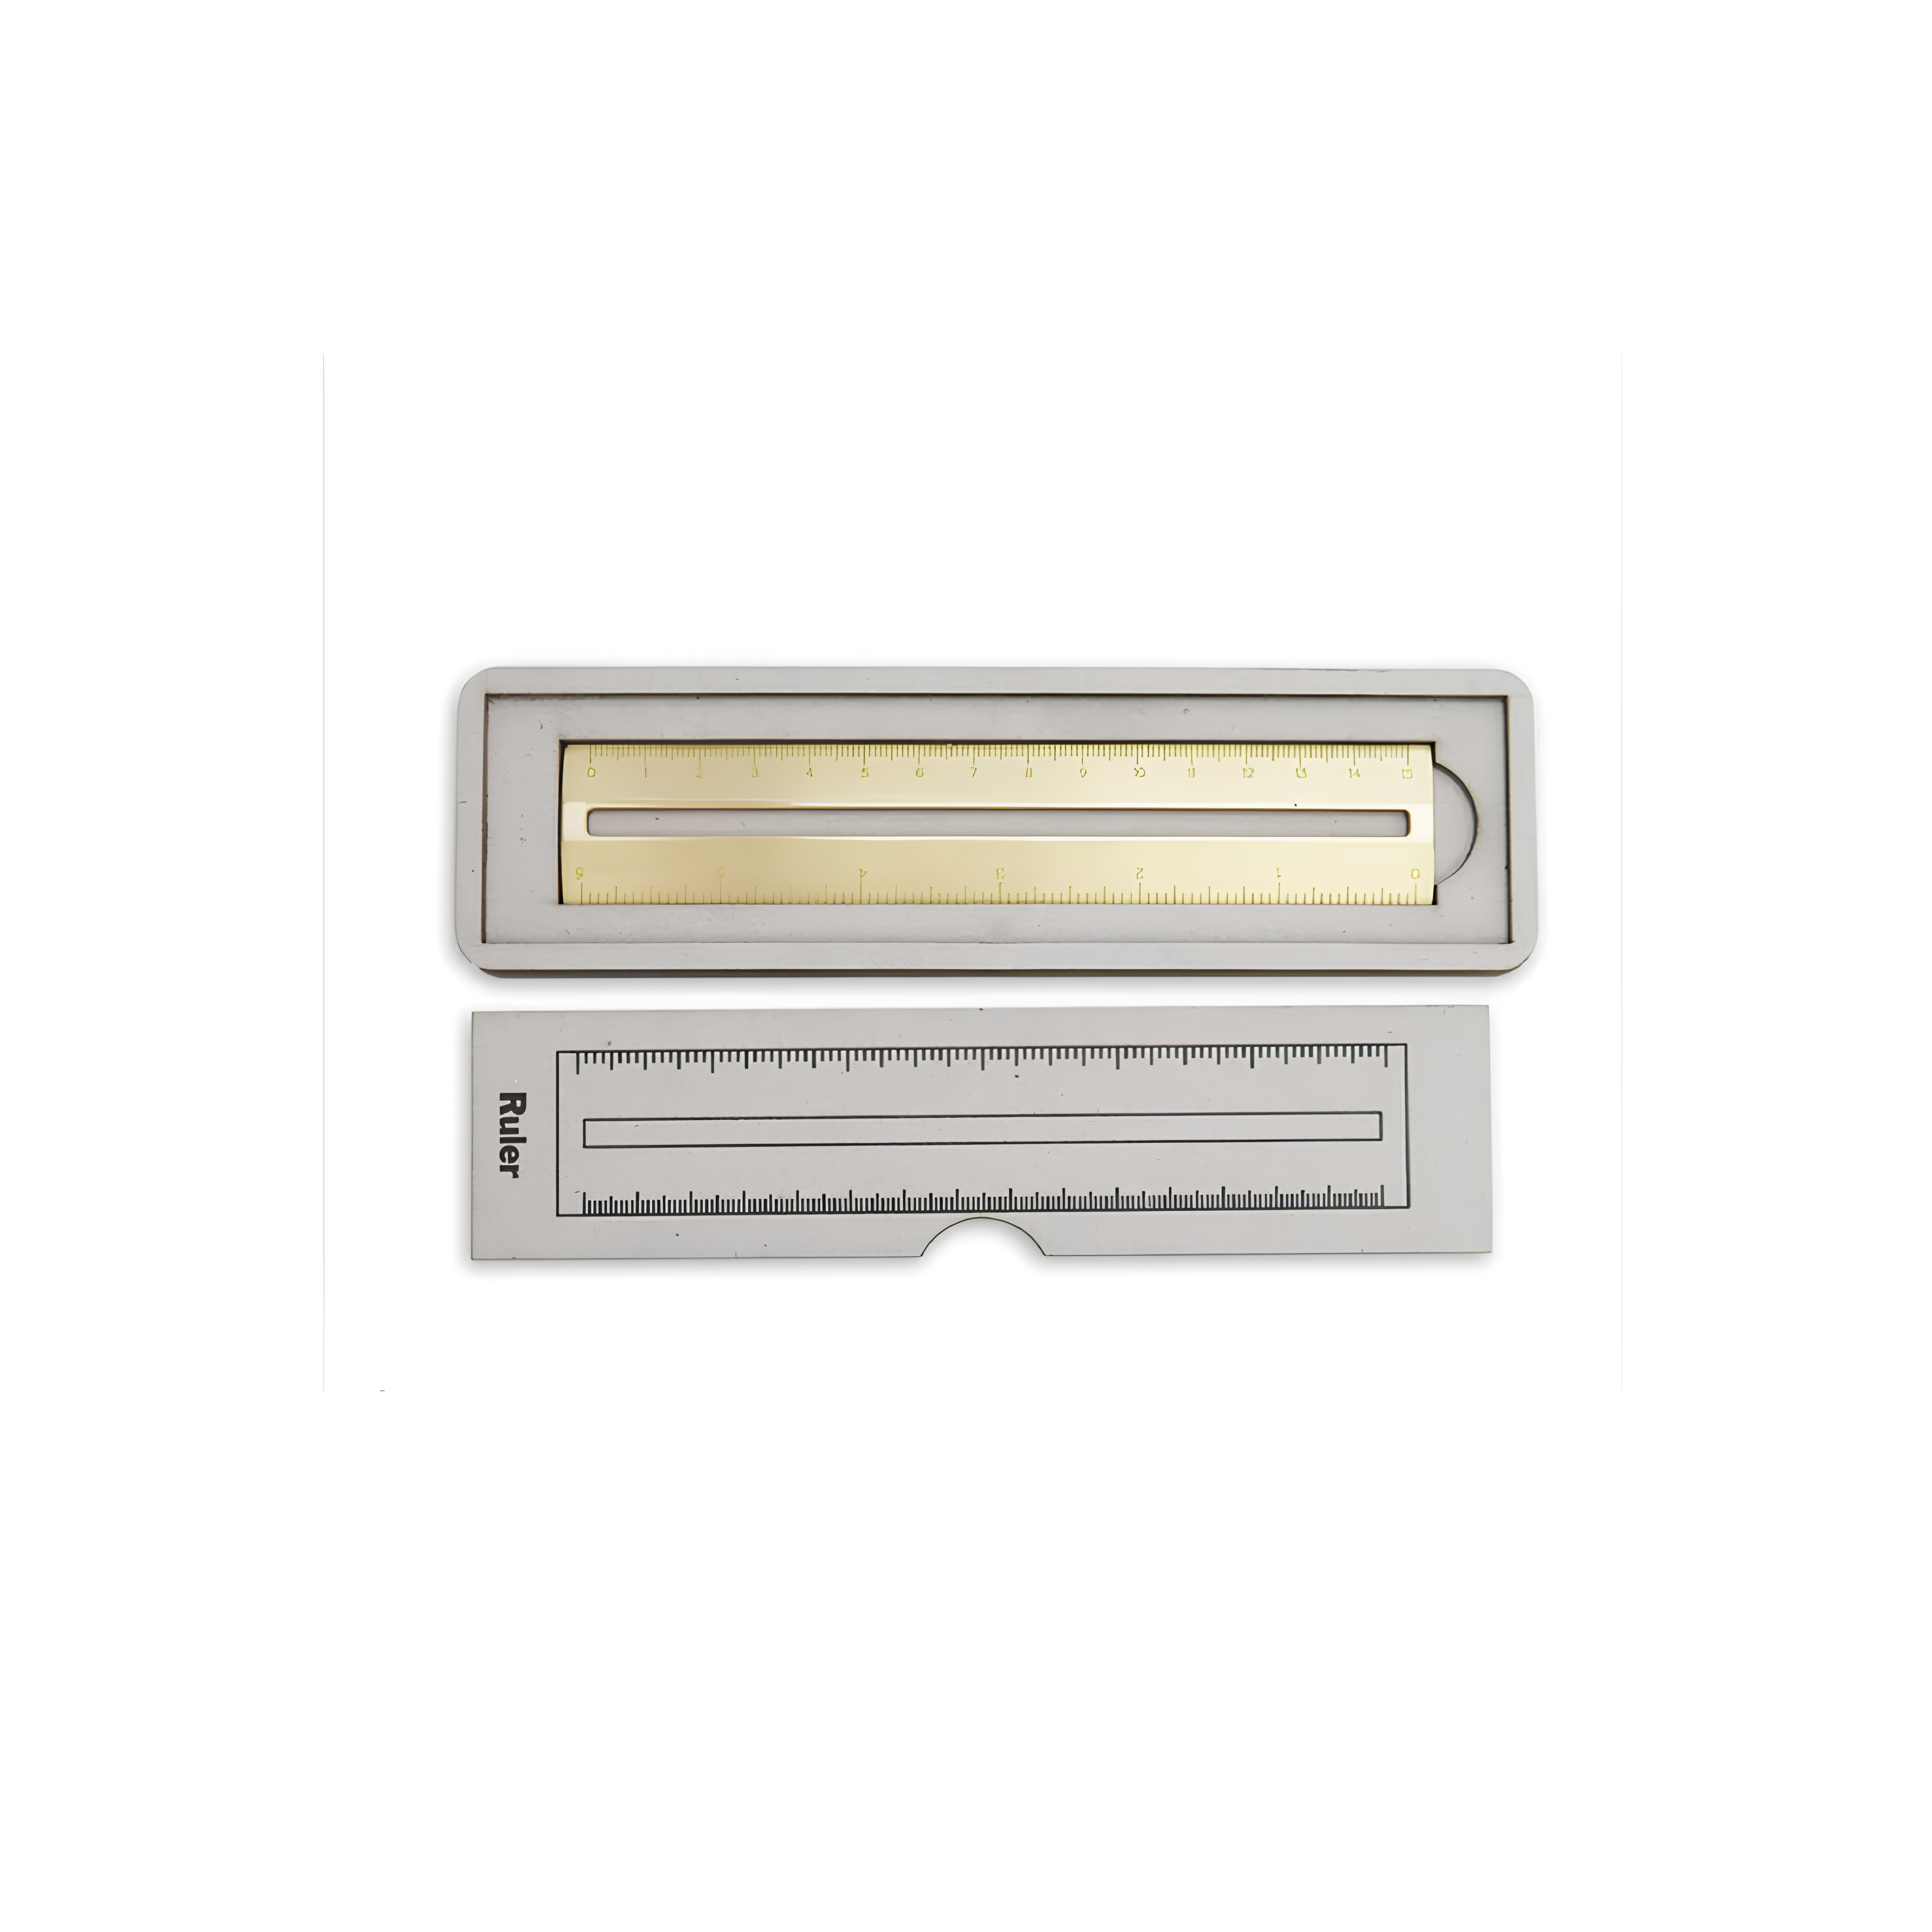 Vintage ruler |  | Premium office accessory that looks great on your desk